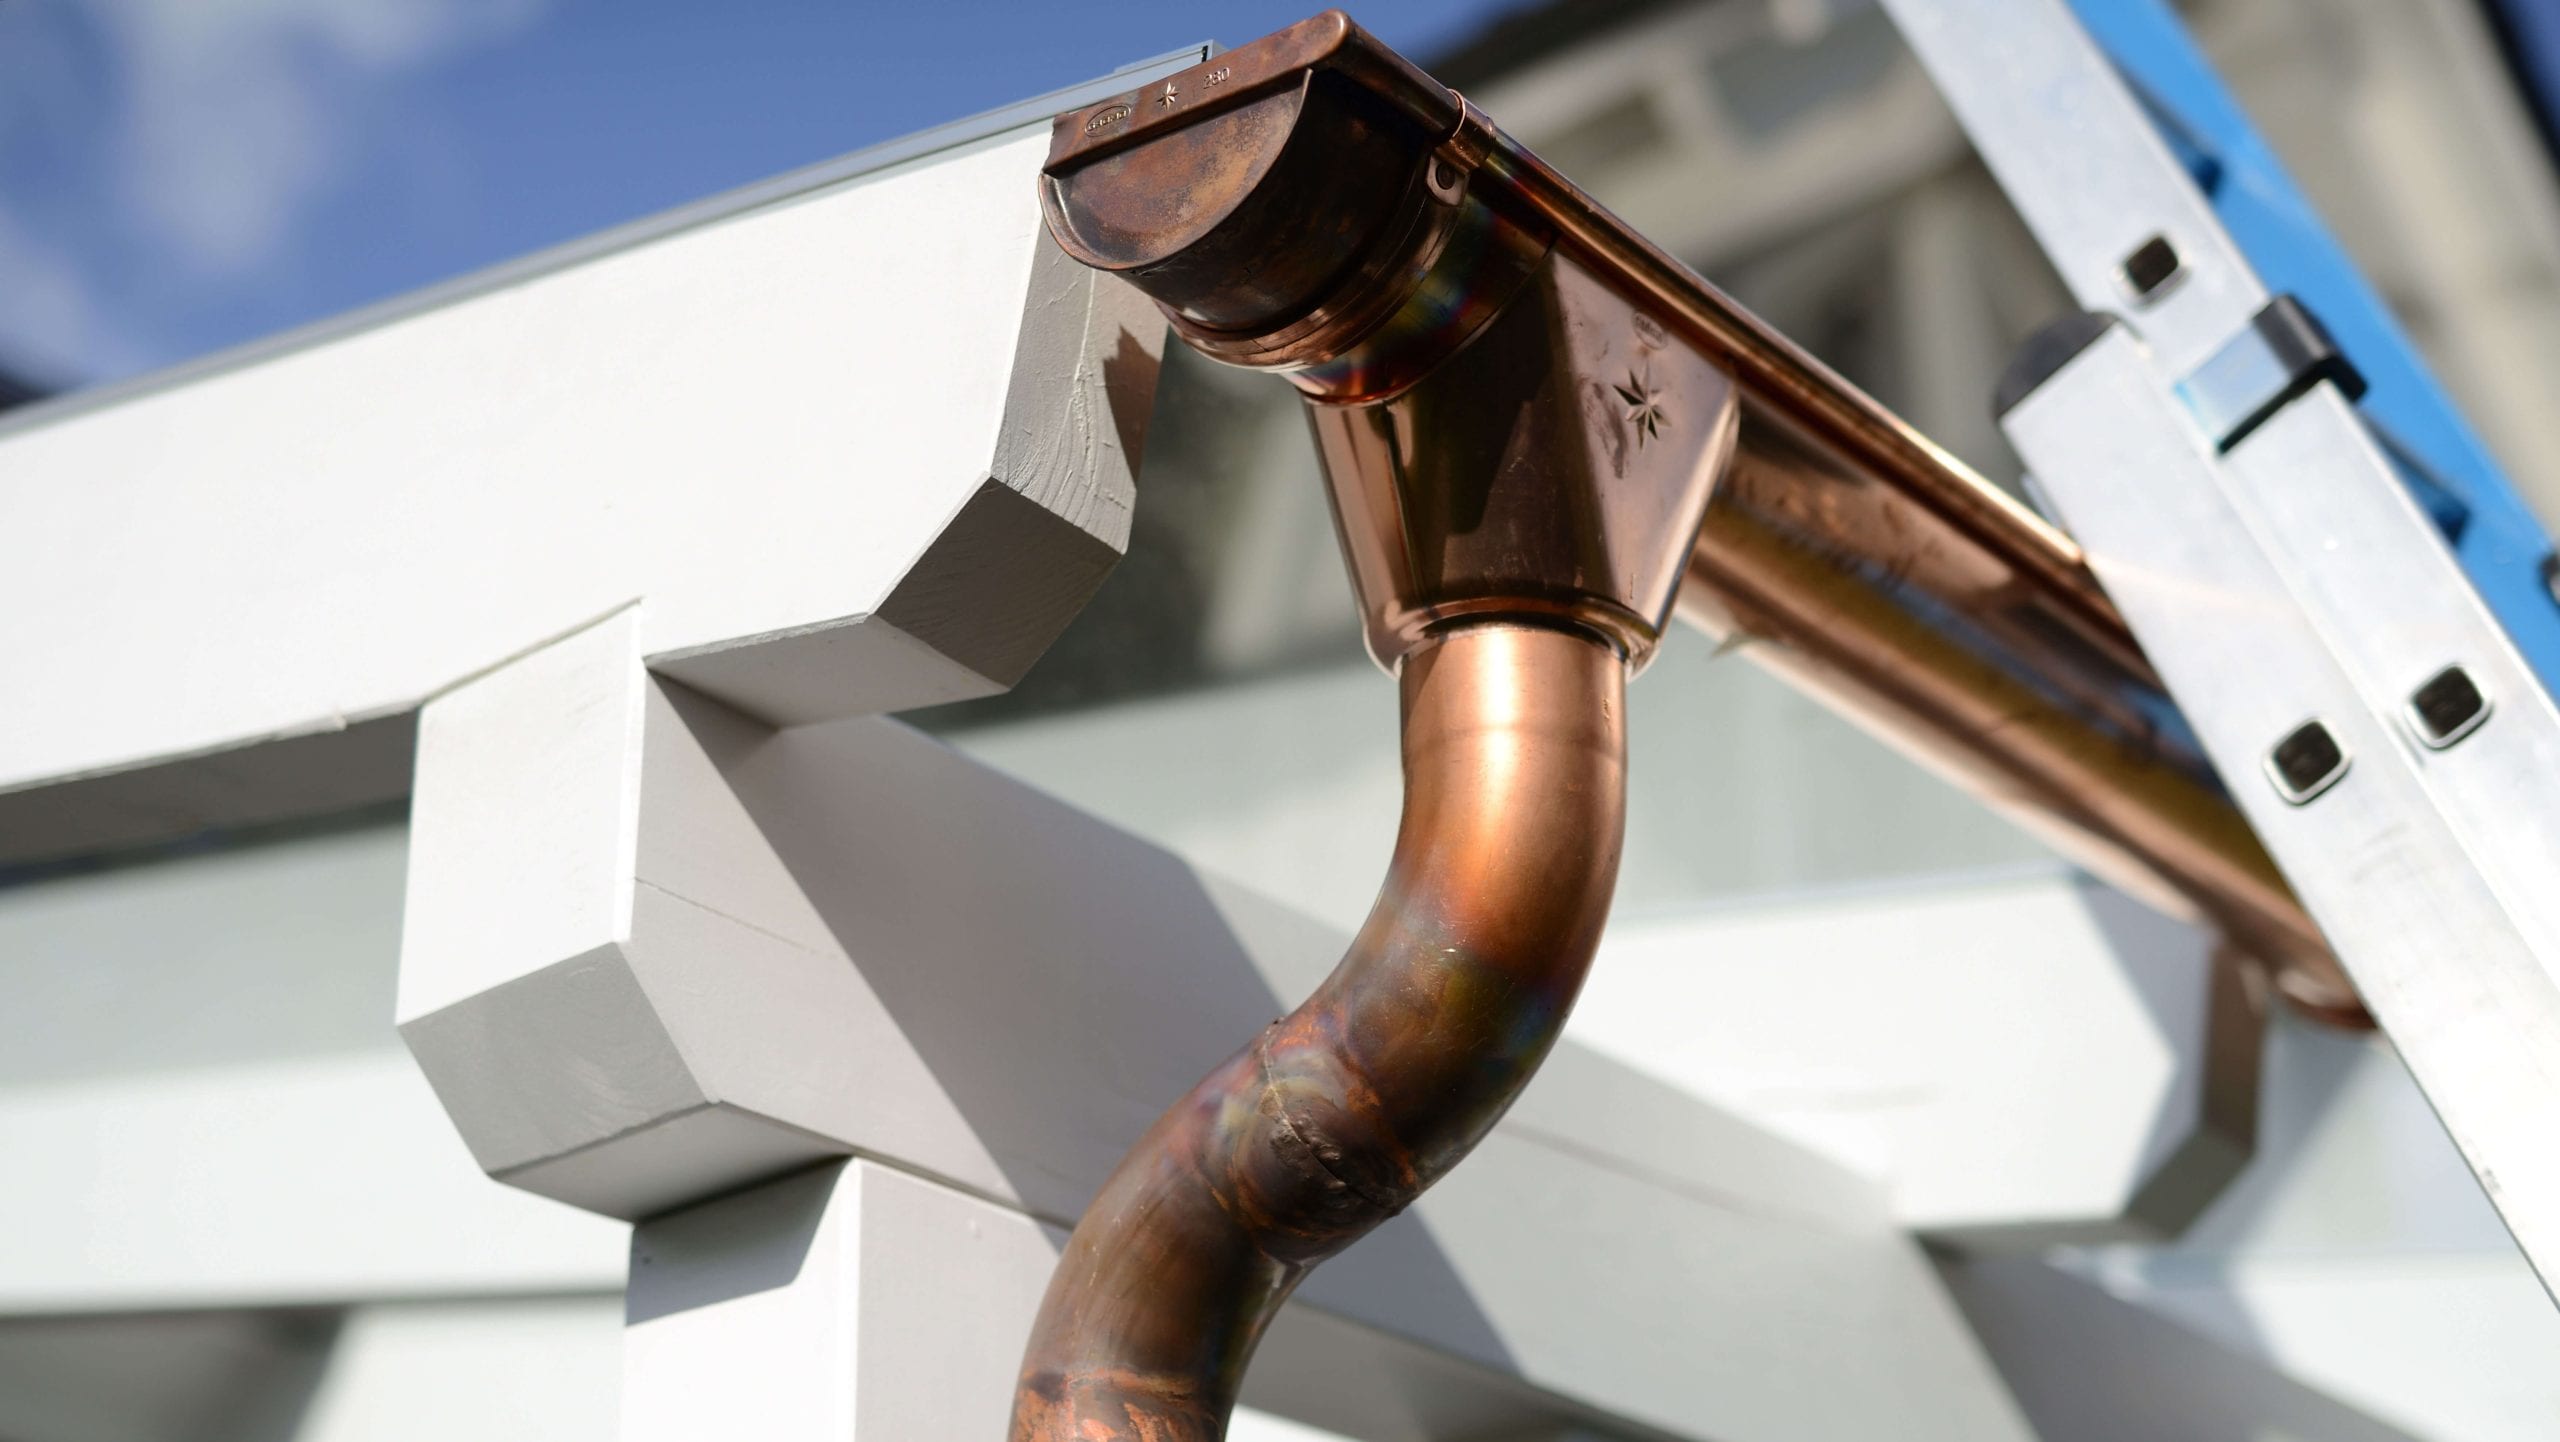 Make your property stand out with copper gutters. Contact for gutter installation in Midlothian